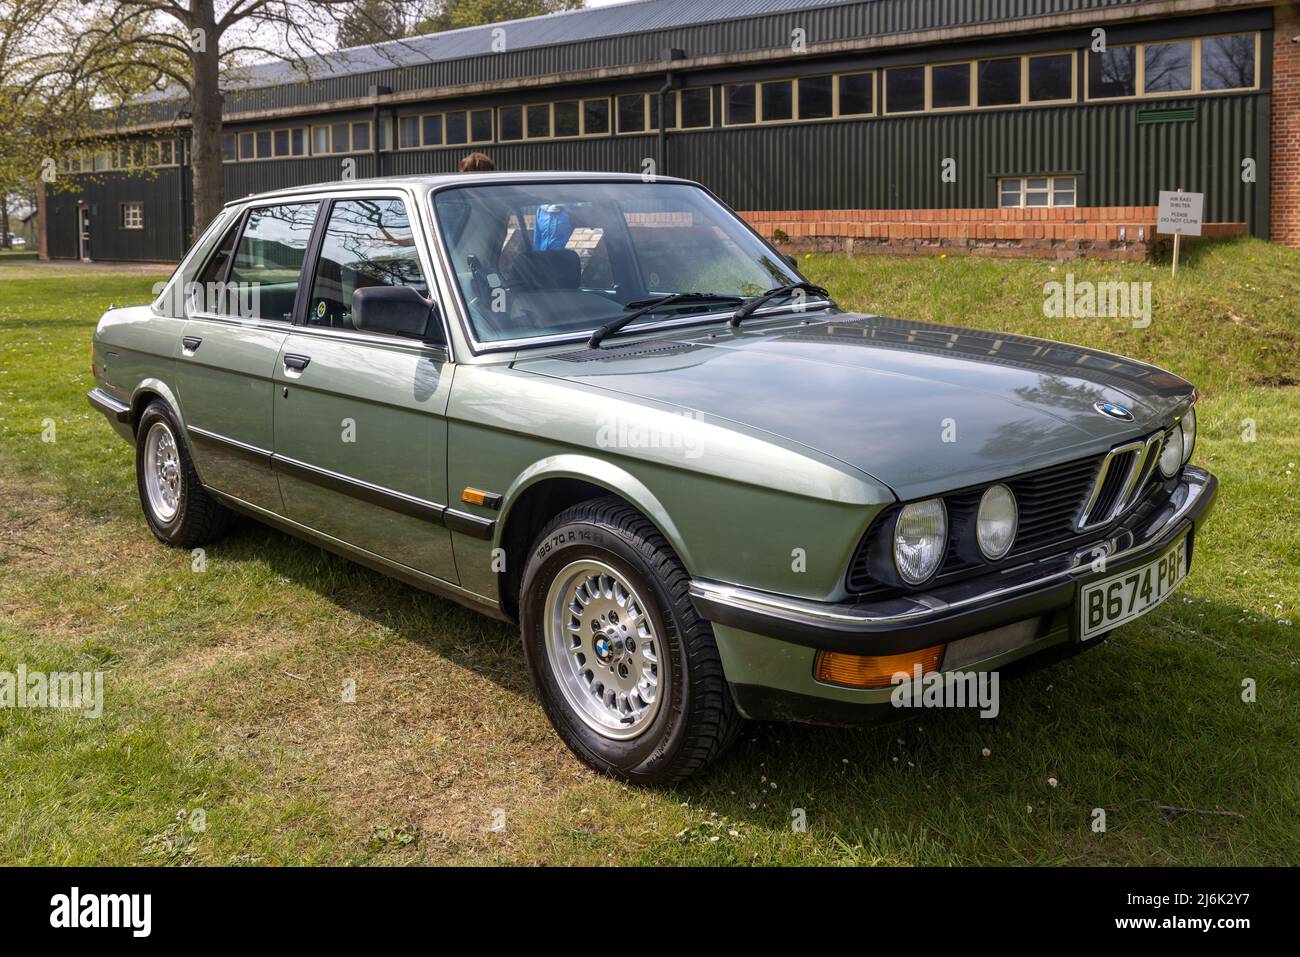 Second Generation 5 Series BMW ‘B674 PBF’ on display at the April Scramble held at the Bicester Heritage Centre on the 23rd April 2022 Stock Photo